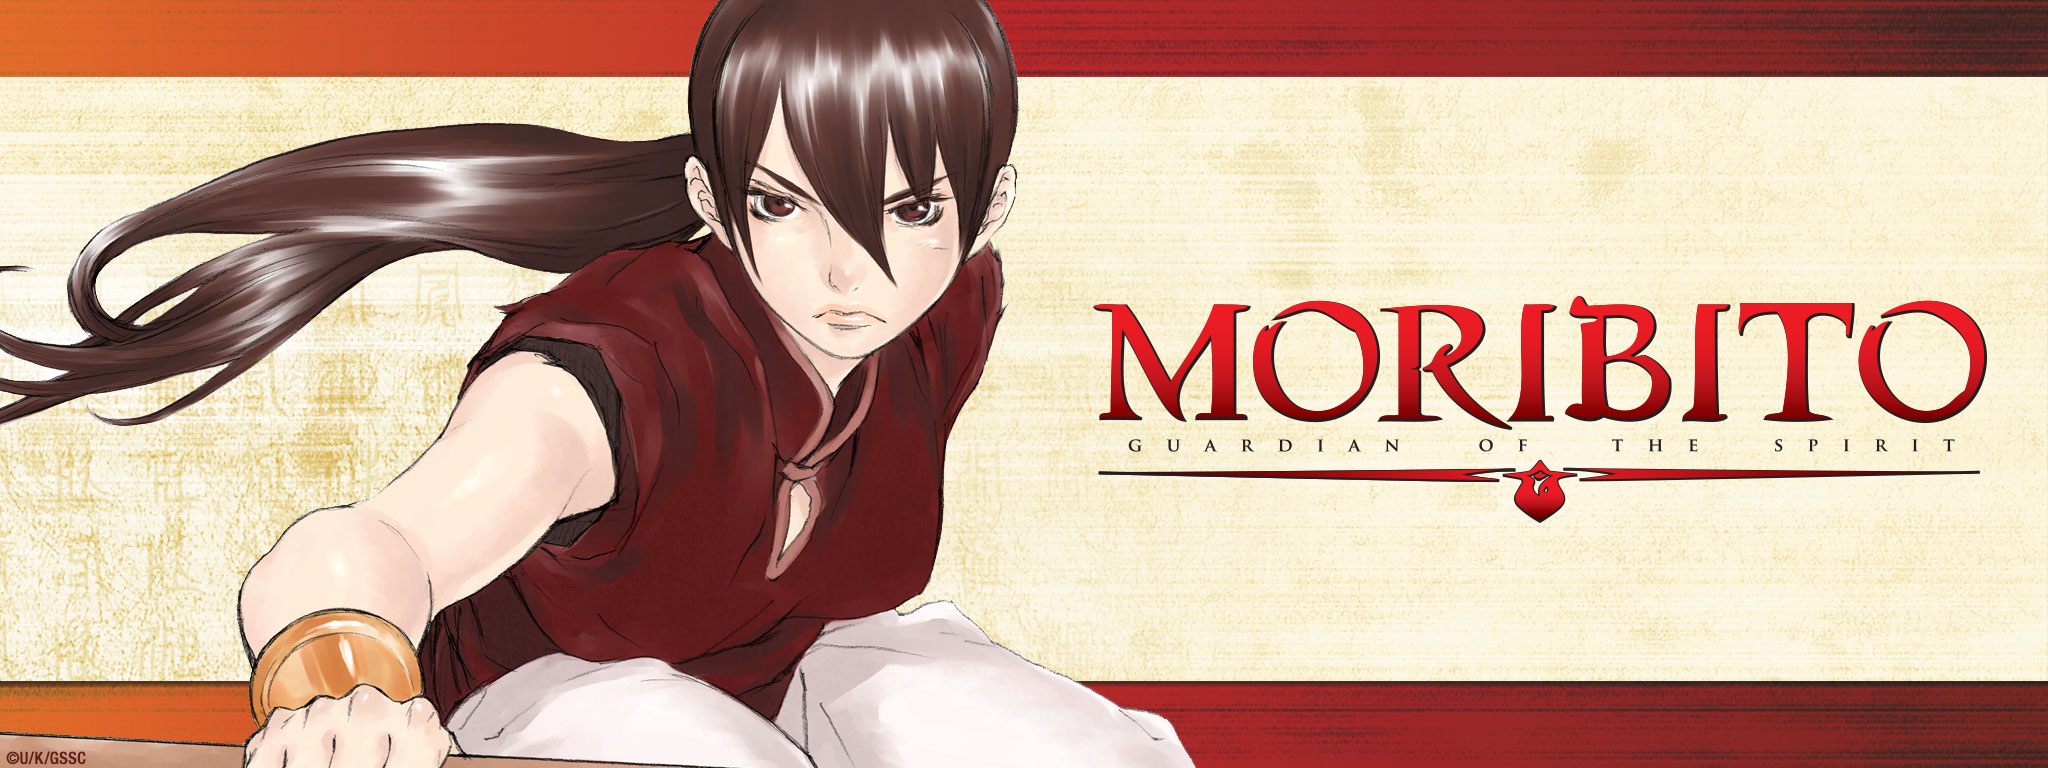 Title Art for Moribito: Guardian of the Spirit